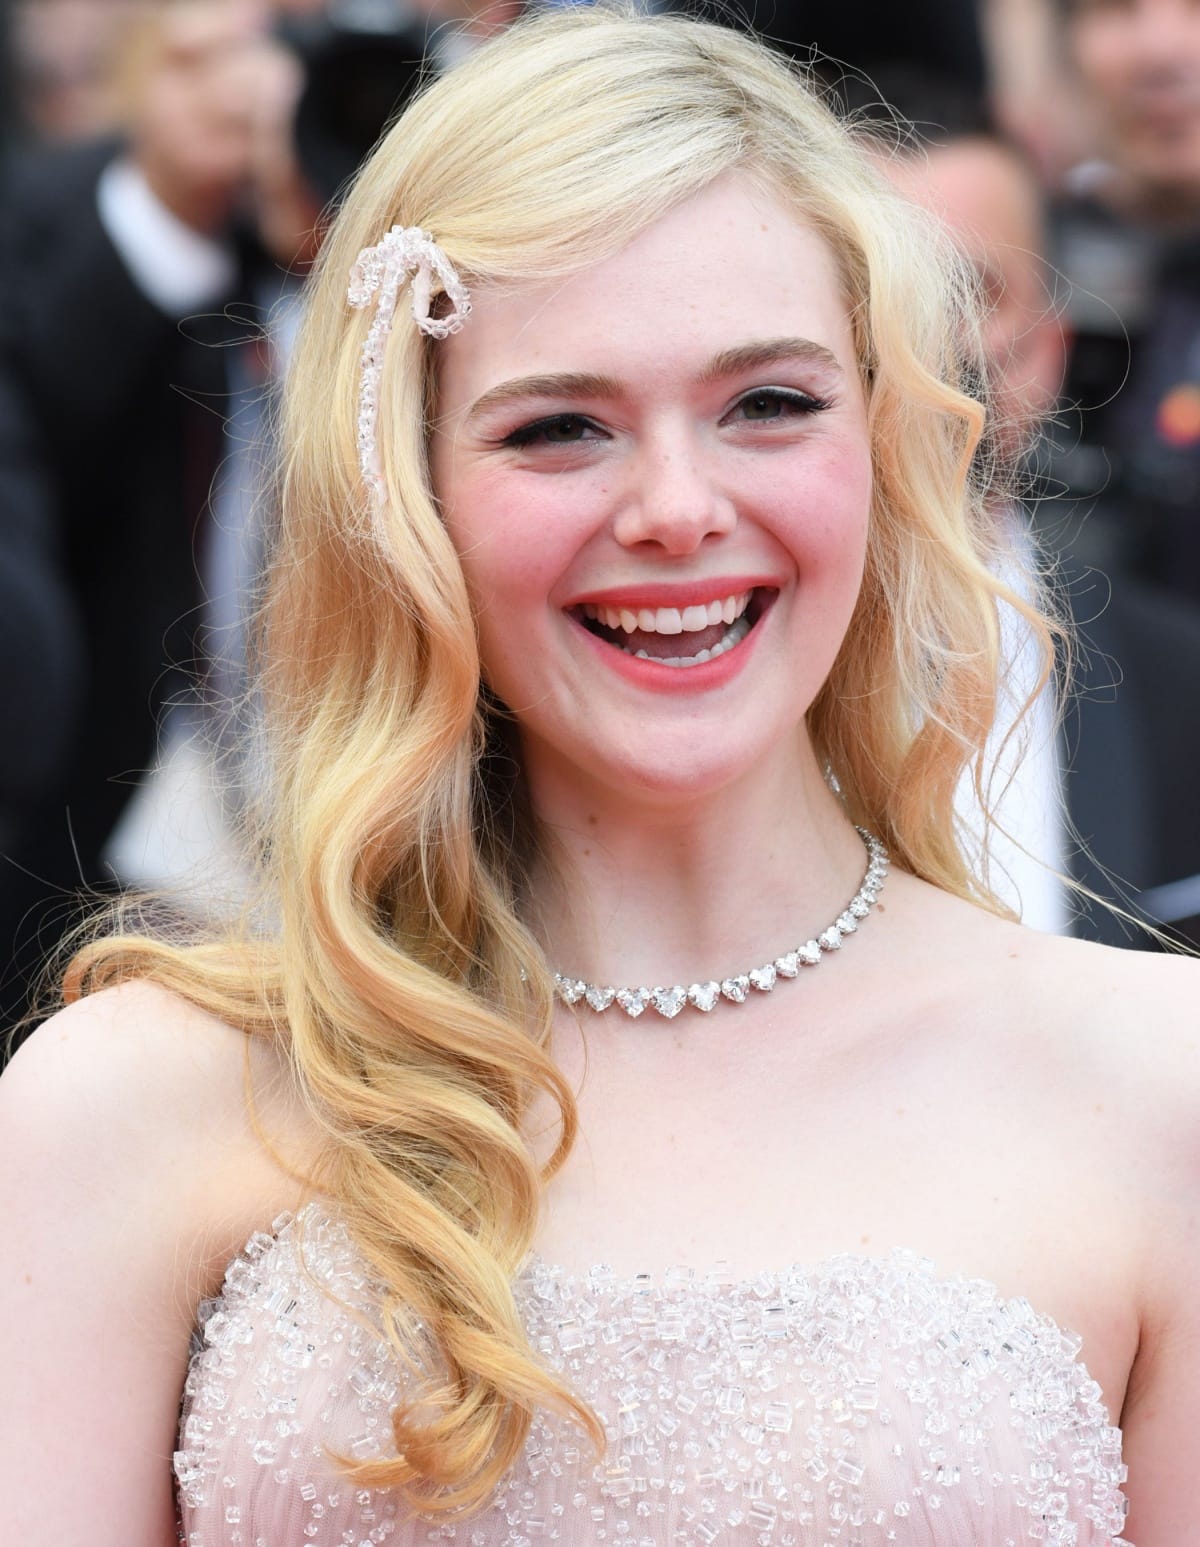 24-year-old Elle Fanning has made a name for herself and built a successful career in Hollywood